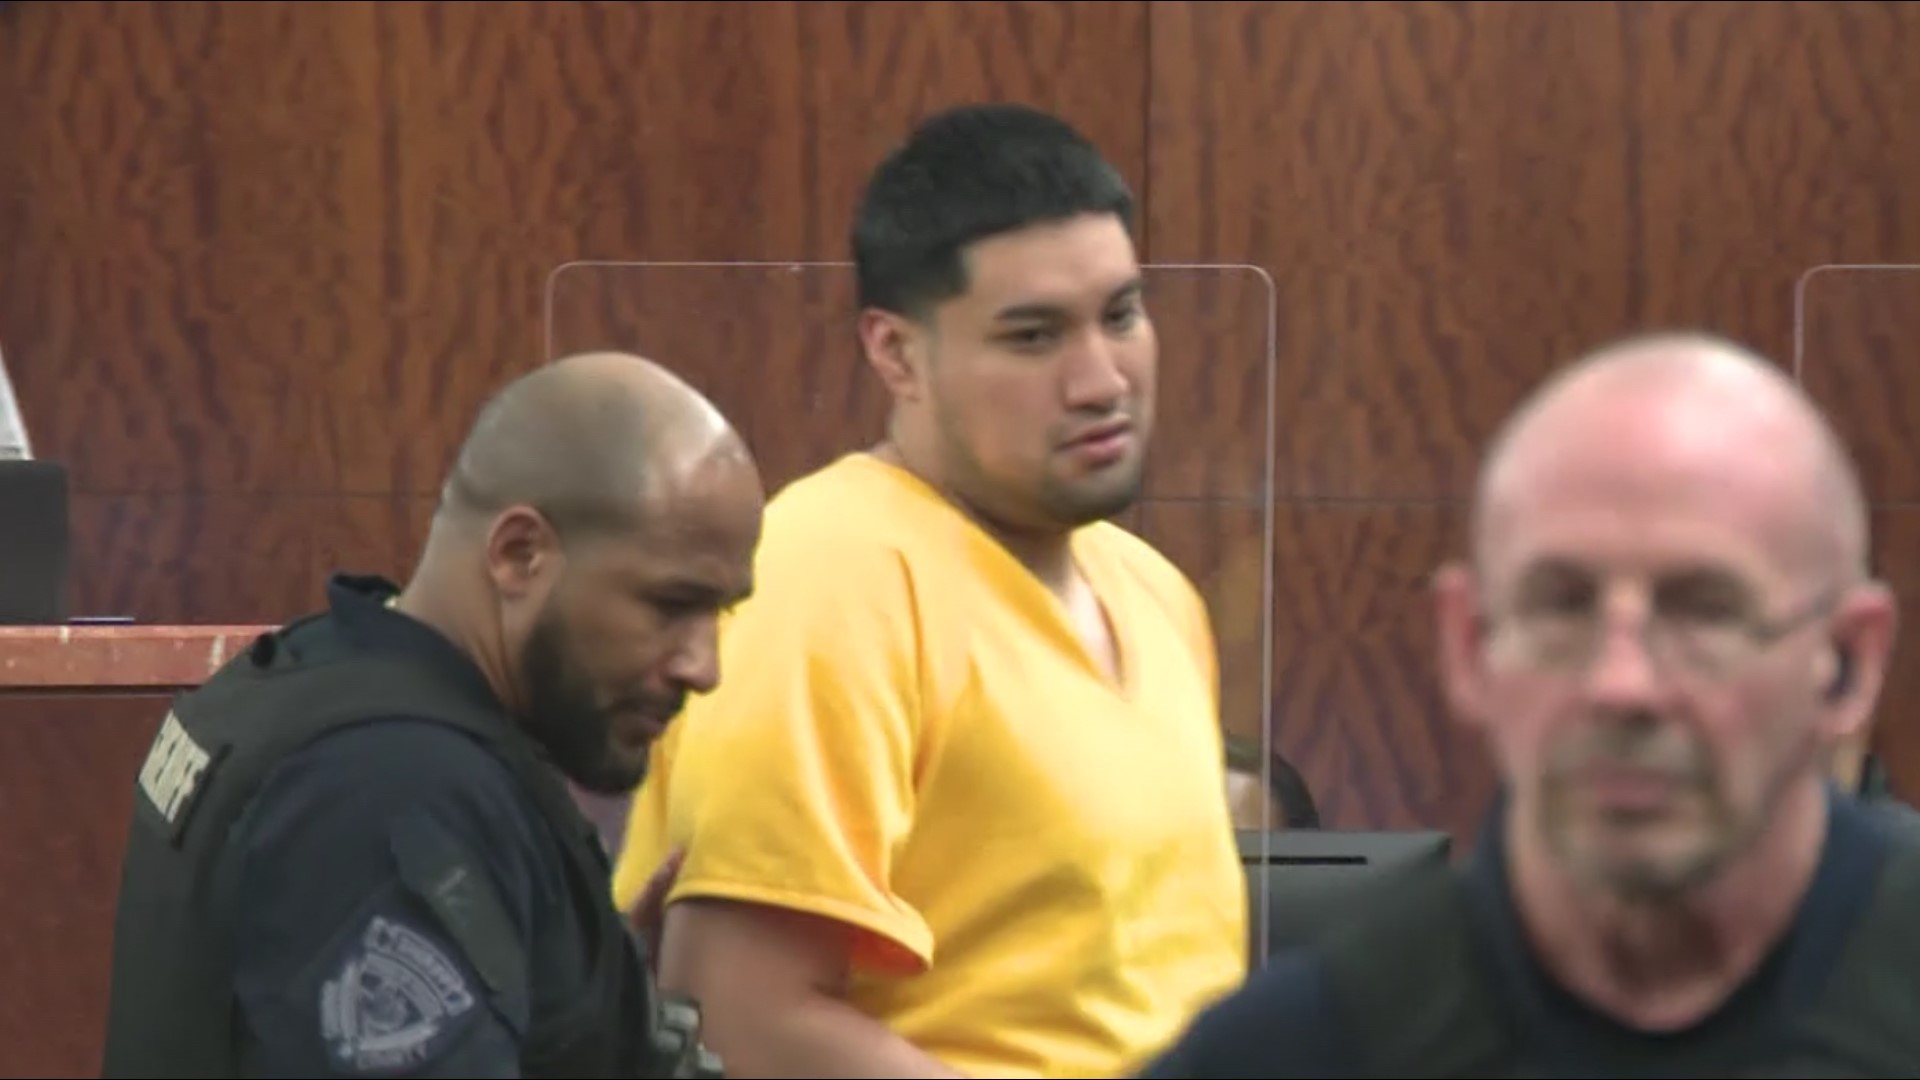 After the weapon was found, Victor Guzman, 26, had his jail privileges restricted. "When you threaten to murder someone, there are consequences," the judge told him.